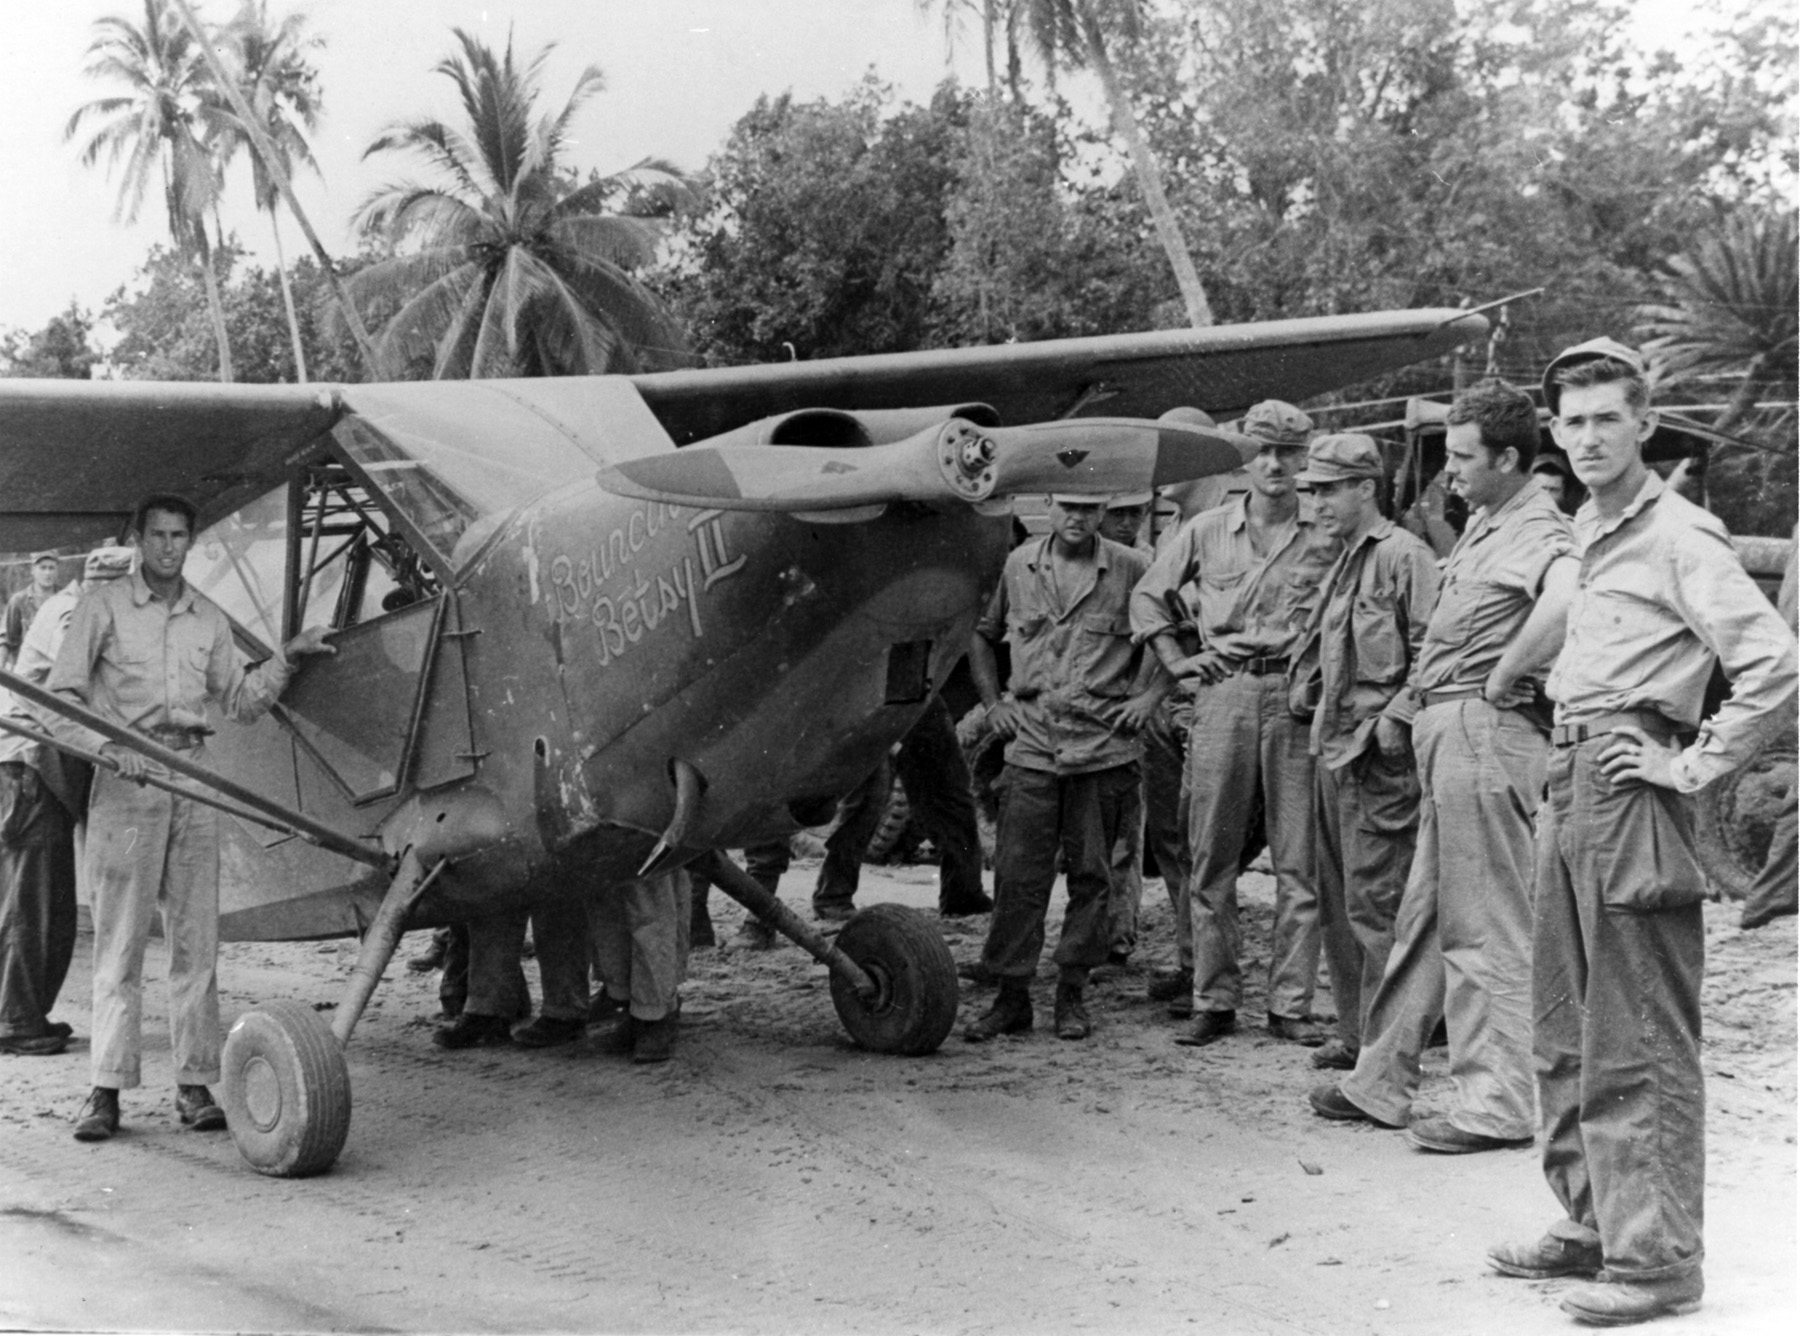 L-5 Sentinel “Bouncing Betsy II” of the 25th Liaison Squadron in New Guinea. Sgt pilots of the “Guinea Short Line” rescued downed fliers and guided fighters to concealed jungle targets. SSGT Jim Nichols standing by the pilot’s door